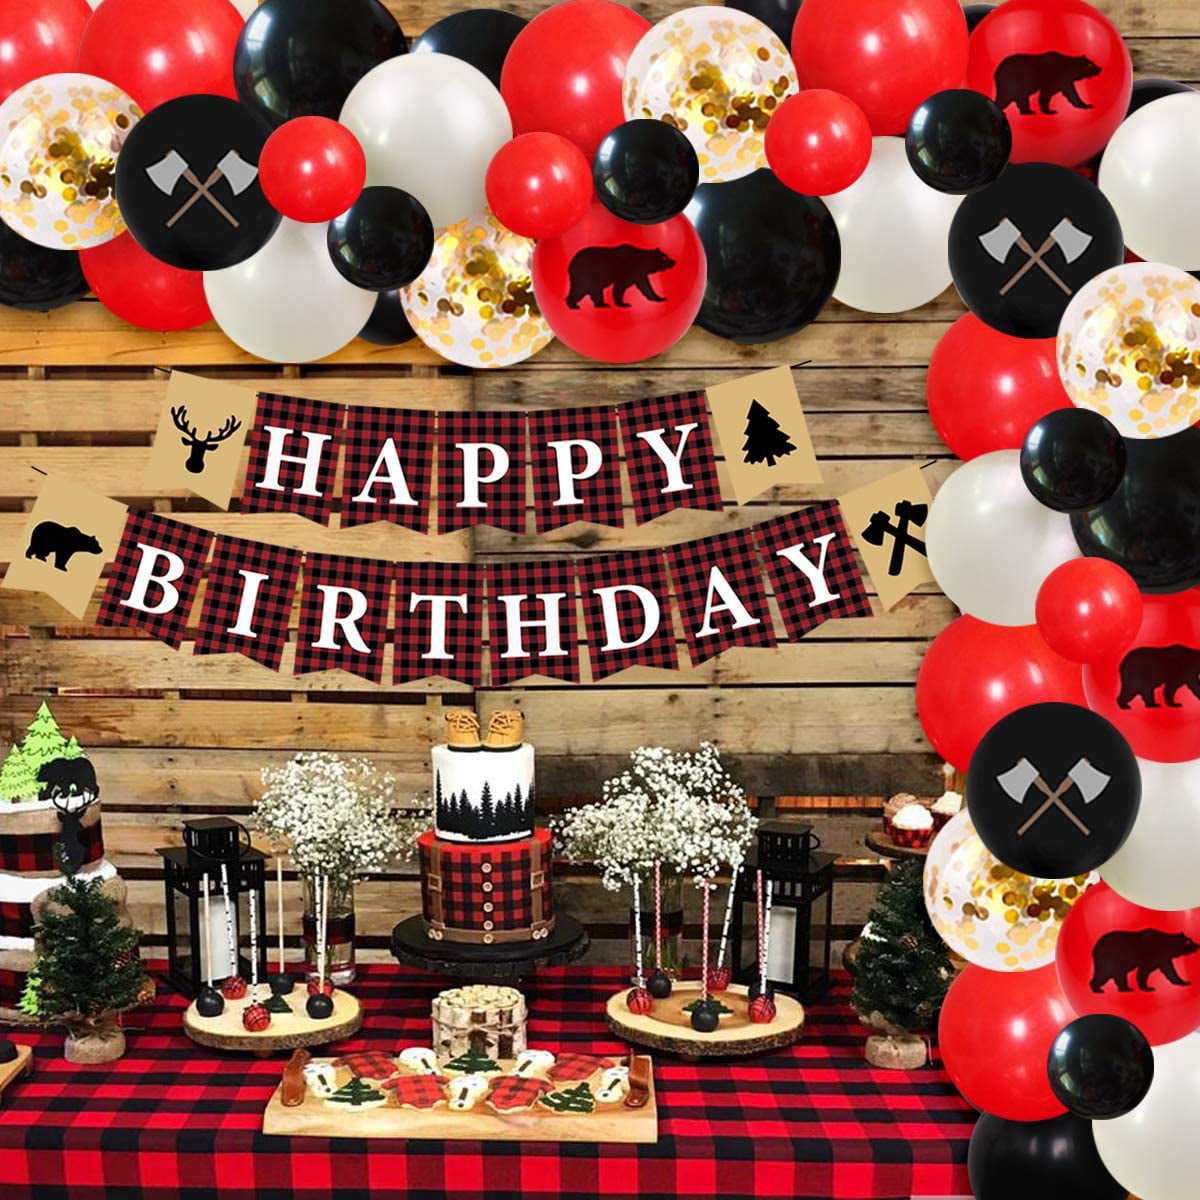 Birthday Baby Shower Christmas Party decorations LumberJack Woodland Confetti Deer,Trees & Buffalo Plaid Jumpsuits 100 Pieces 